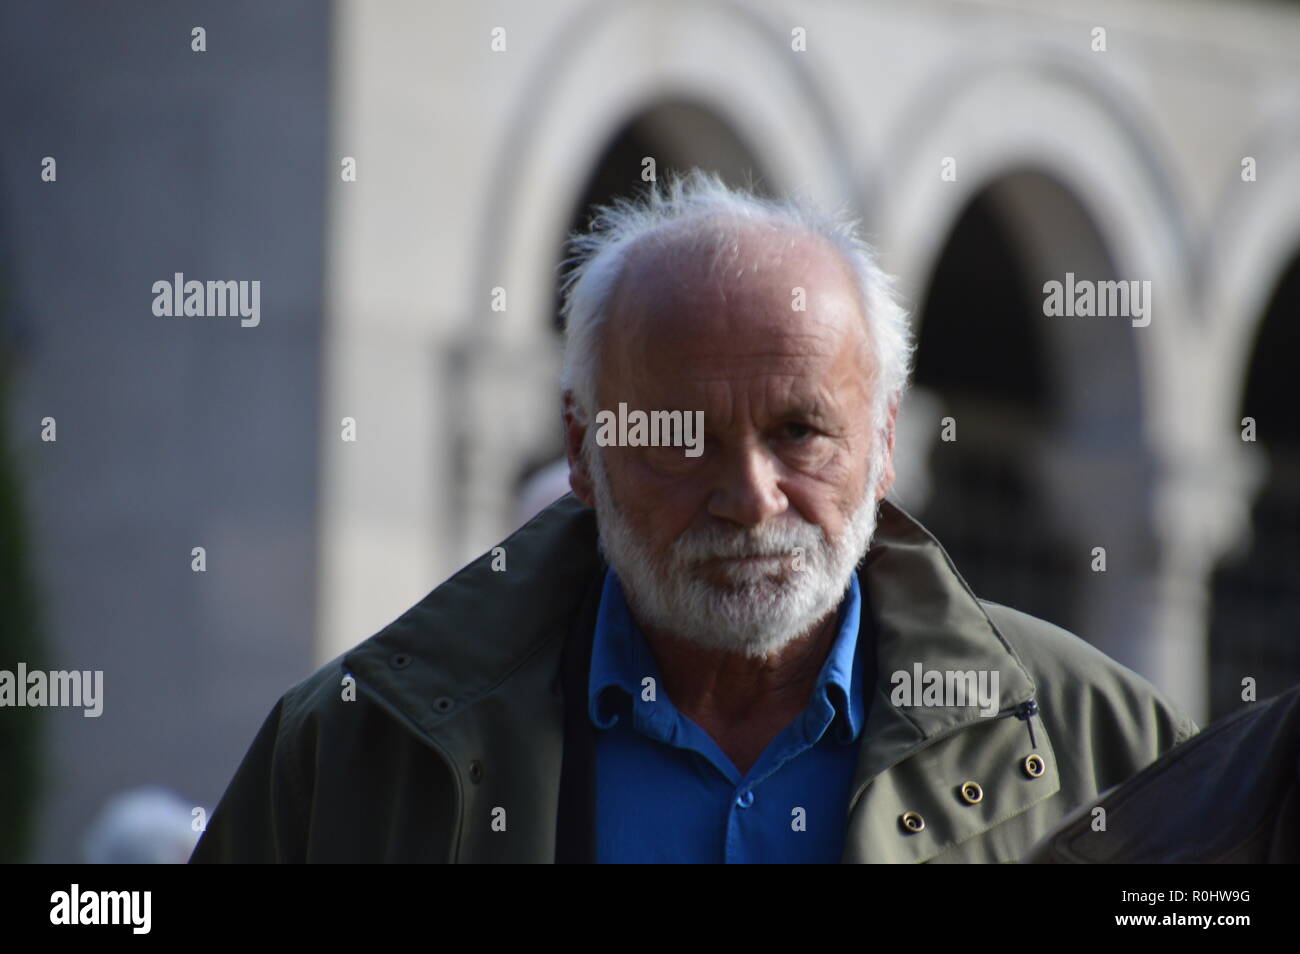 Paris, France. 5th Nov 2018. Jerome Bonaldi, french tv animator, among the celebrities who attend the ceremony for the death of Philippe GILDAS, french TV animator. Crematorium of the Cemetery of the Pere Lachaise, Paris, France. 5 november 2018. 13h30.  ALPHACIT NEWIM / Alamy Live News Credit: Alphacit NEWIM/Alamy Live News Stock Photo